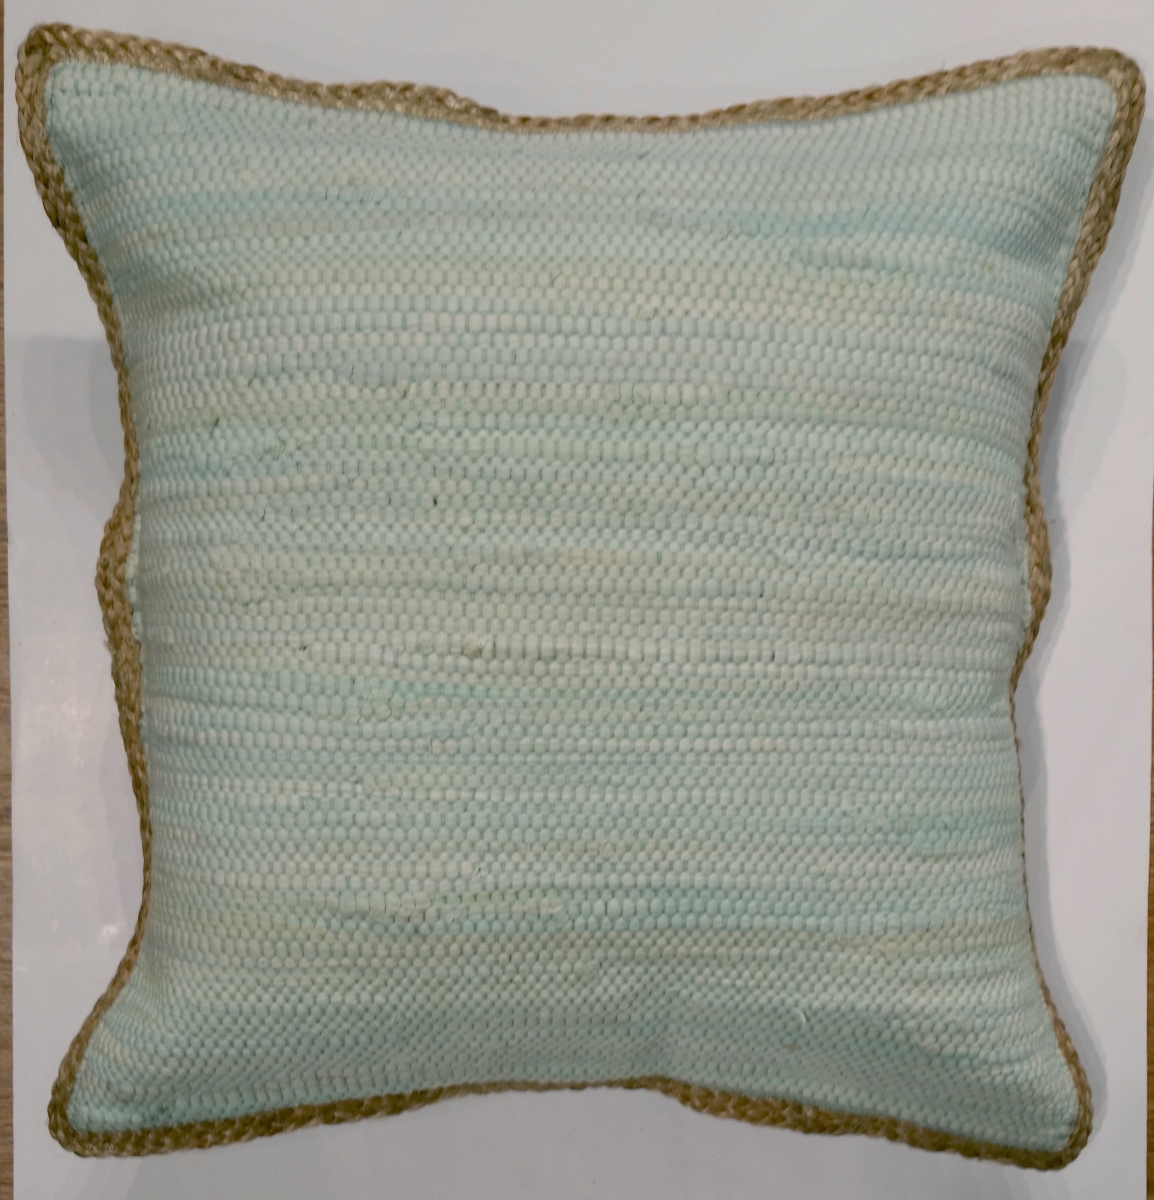 20 X 20 In. Square Pillow, Blue